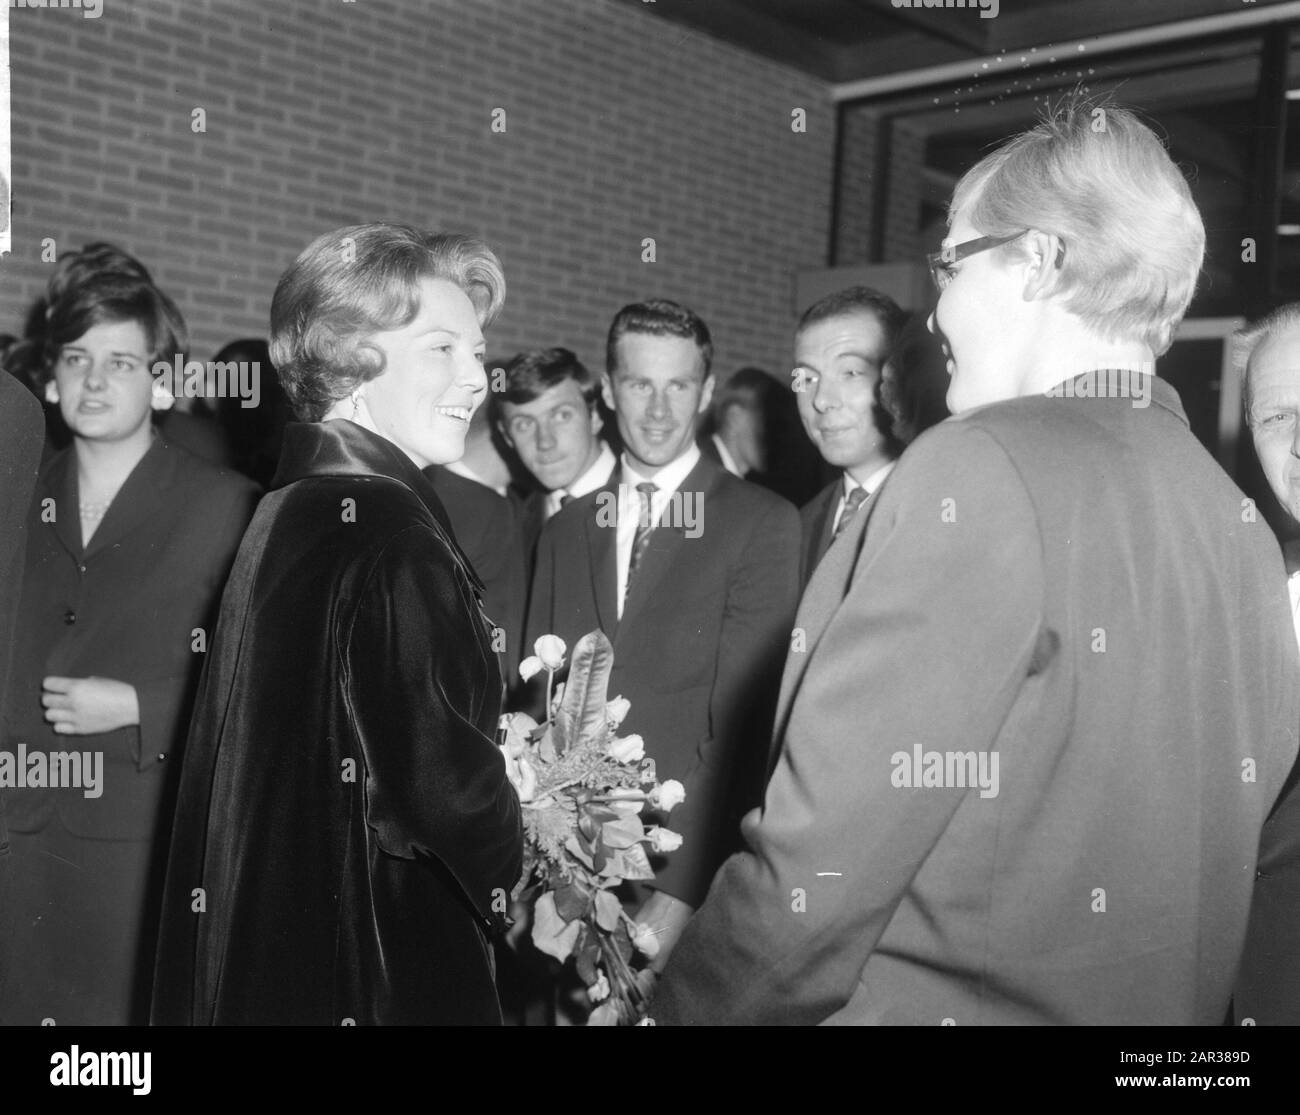 Princess Beatrix and her fiancée Claus von Amsberg at premiere of the film Tokyo Olympiad in Amsterdam  Princess Beatrix in conversation with SwimTerada Kok Annotation: Documentary film directed by Kon Ichikawa about the 1964 Summer Olympics in Tokyo Date: 15 October 1965 Location: Amsterdam, Noord-Holland Keywords: documentaries, film, premieres, princesses, top sport Personal name: Beatrix, princess, Kok, Ada Stock Photo